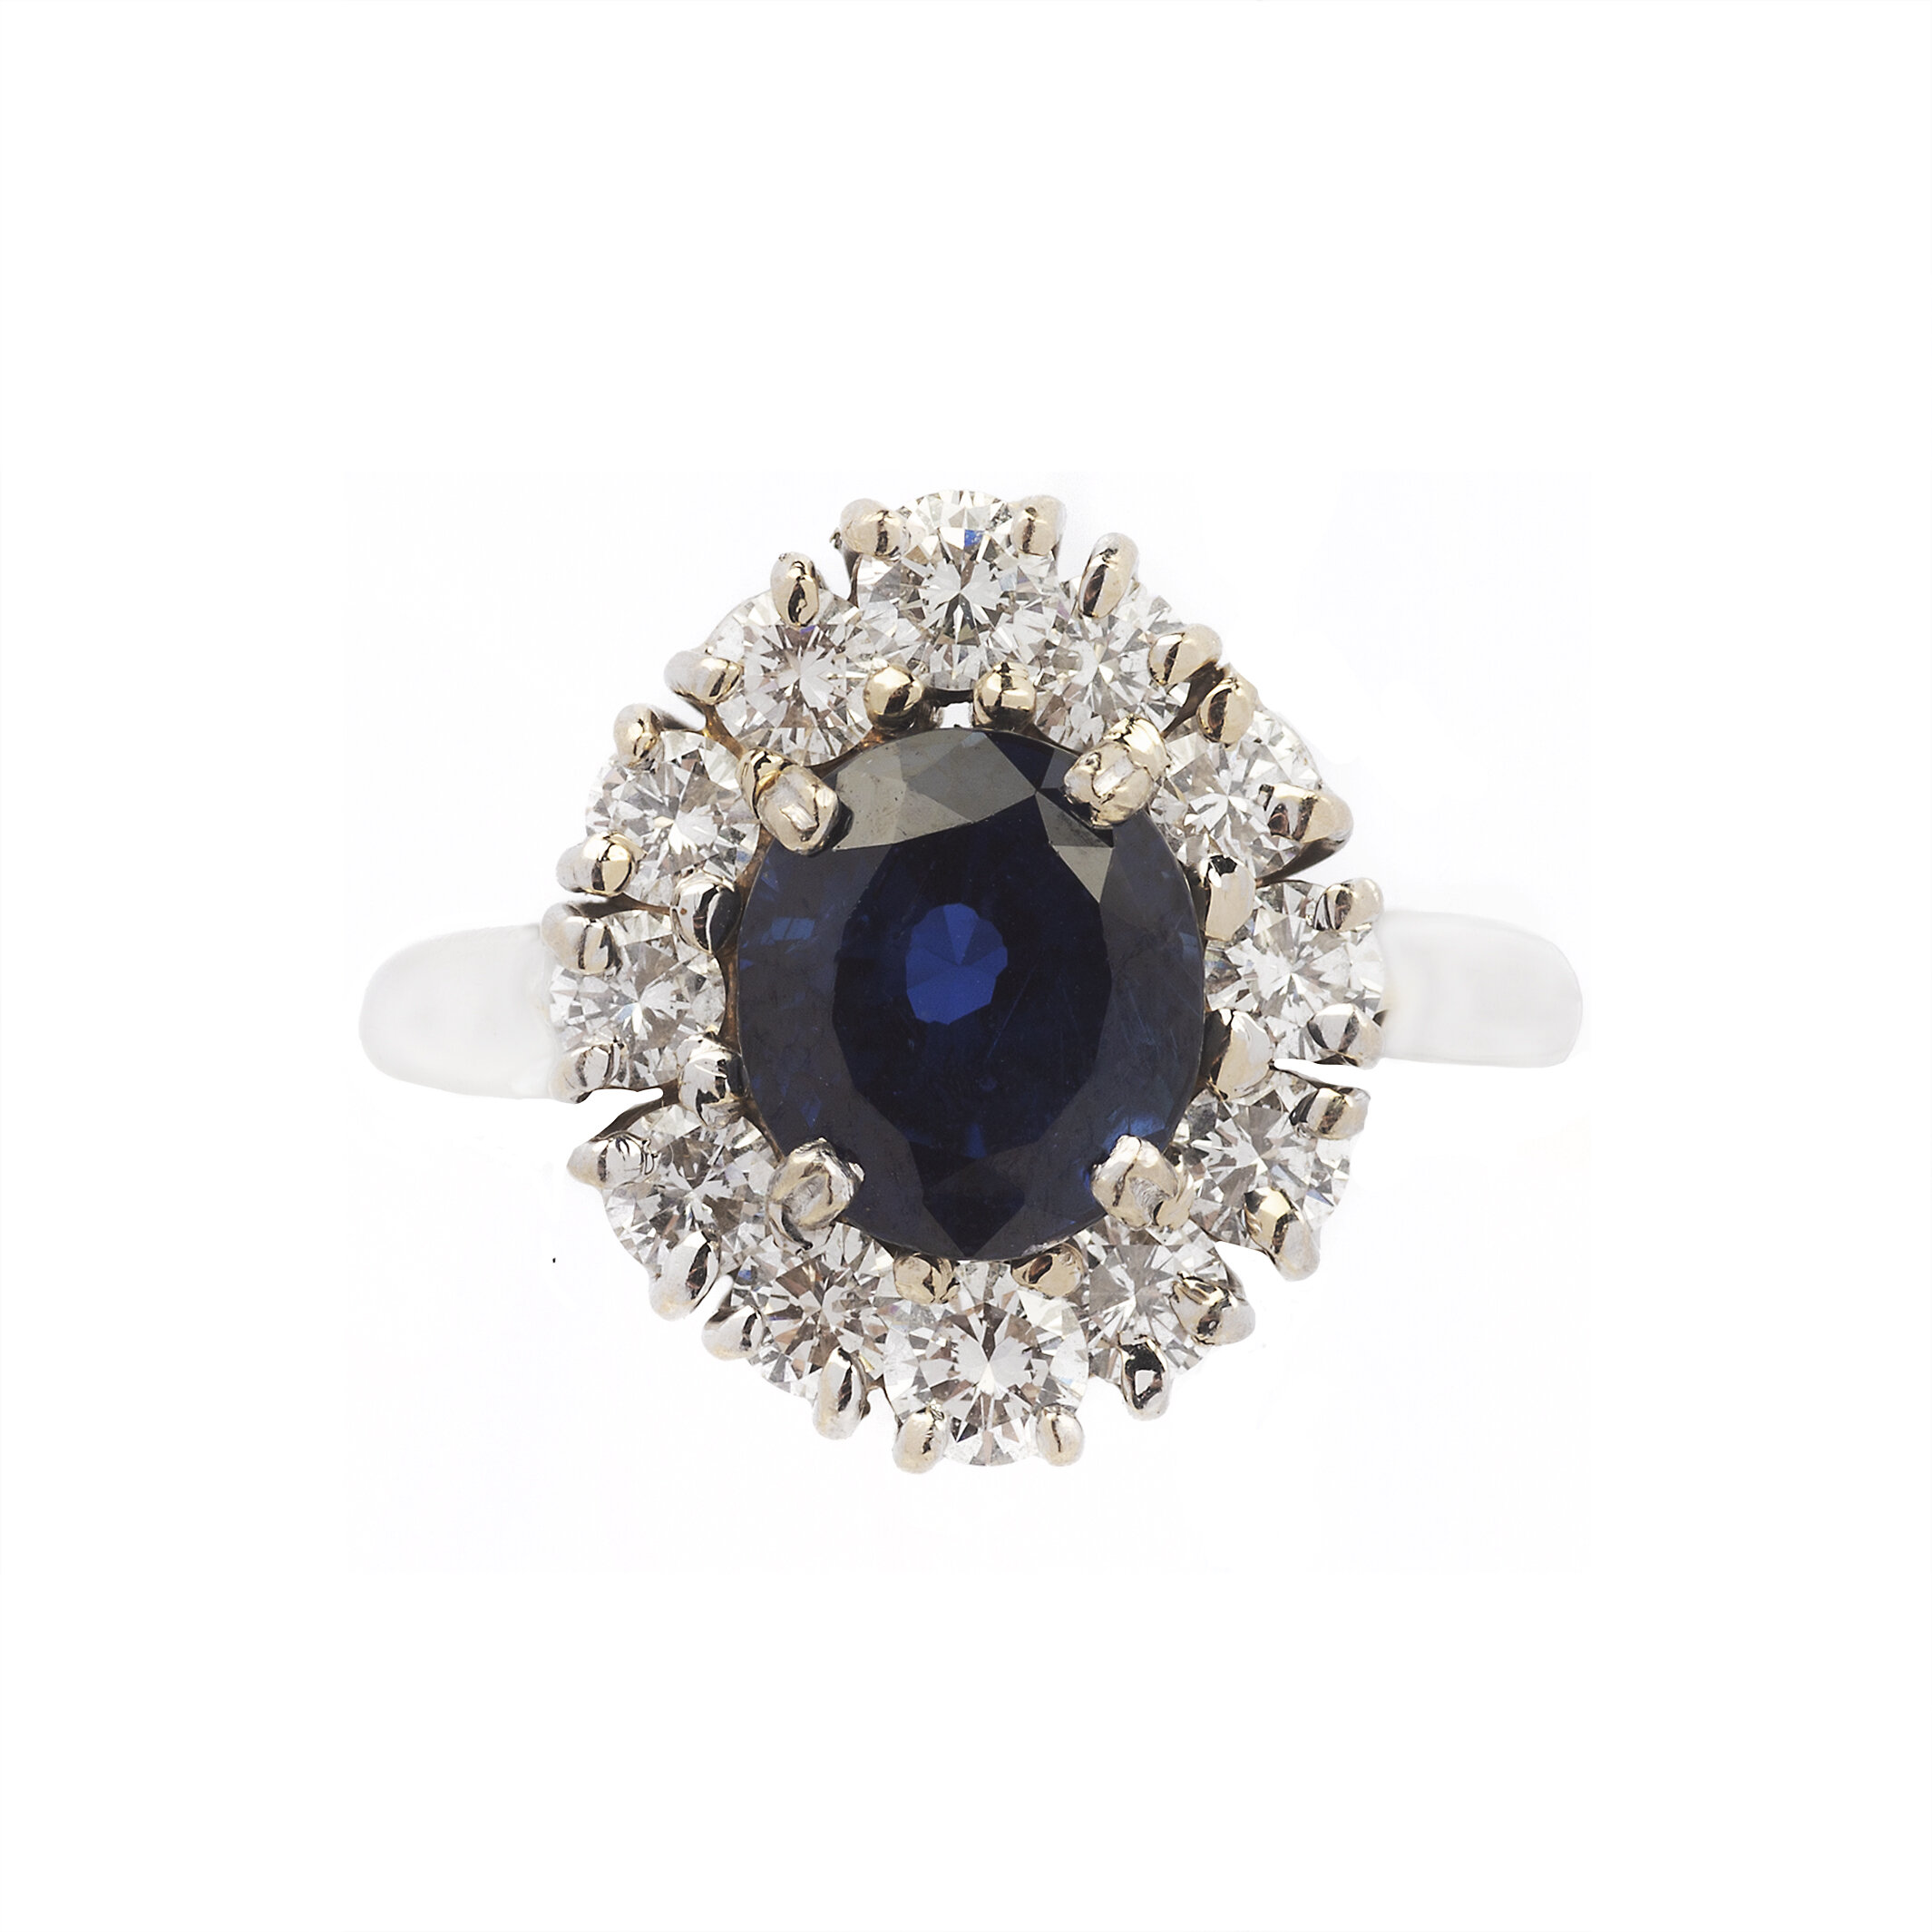 Vintage Gold, Diamond and Sapphire Ring